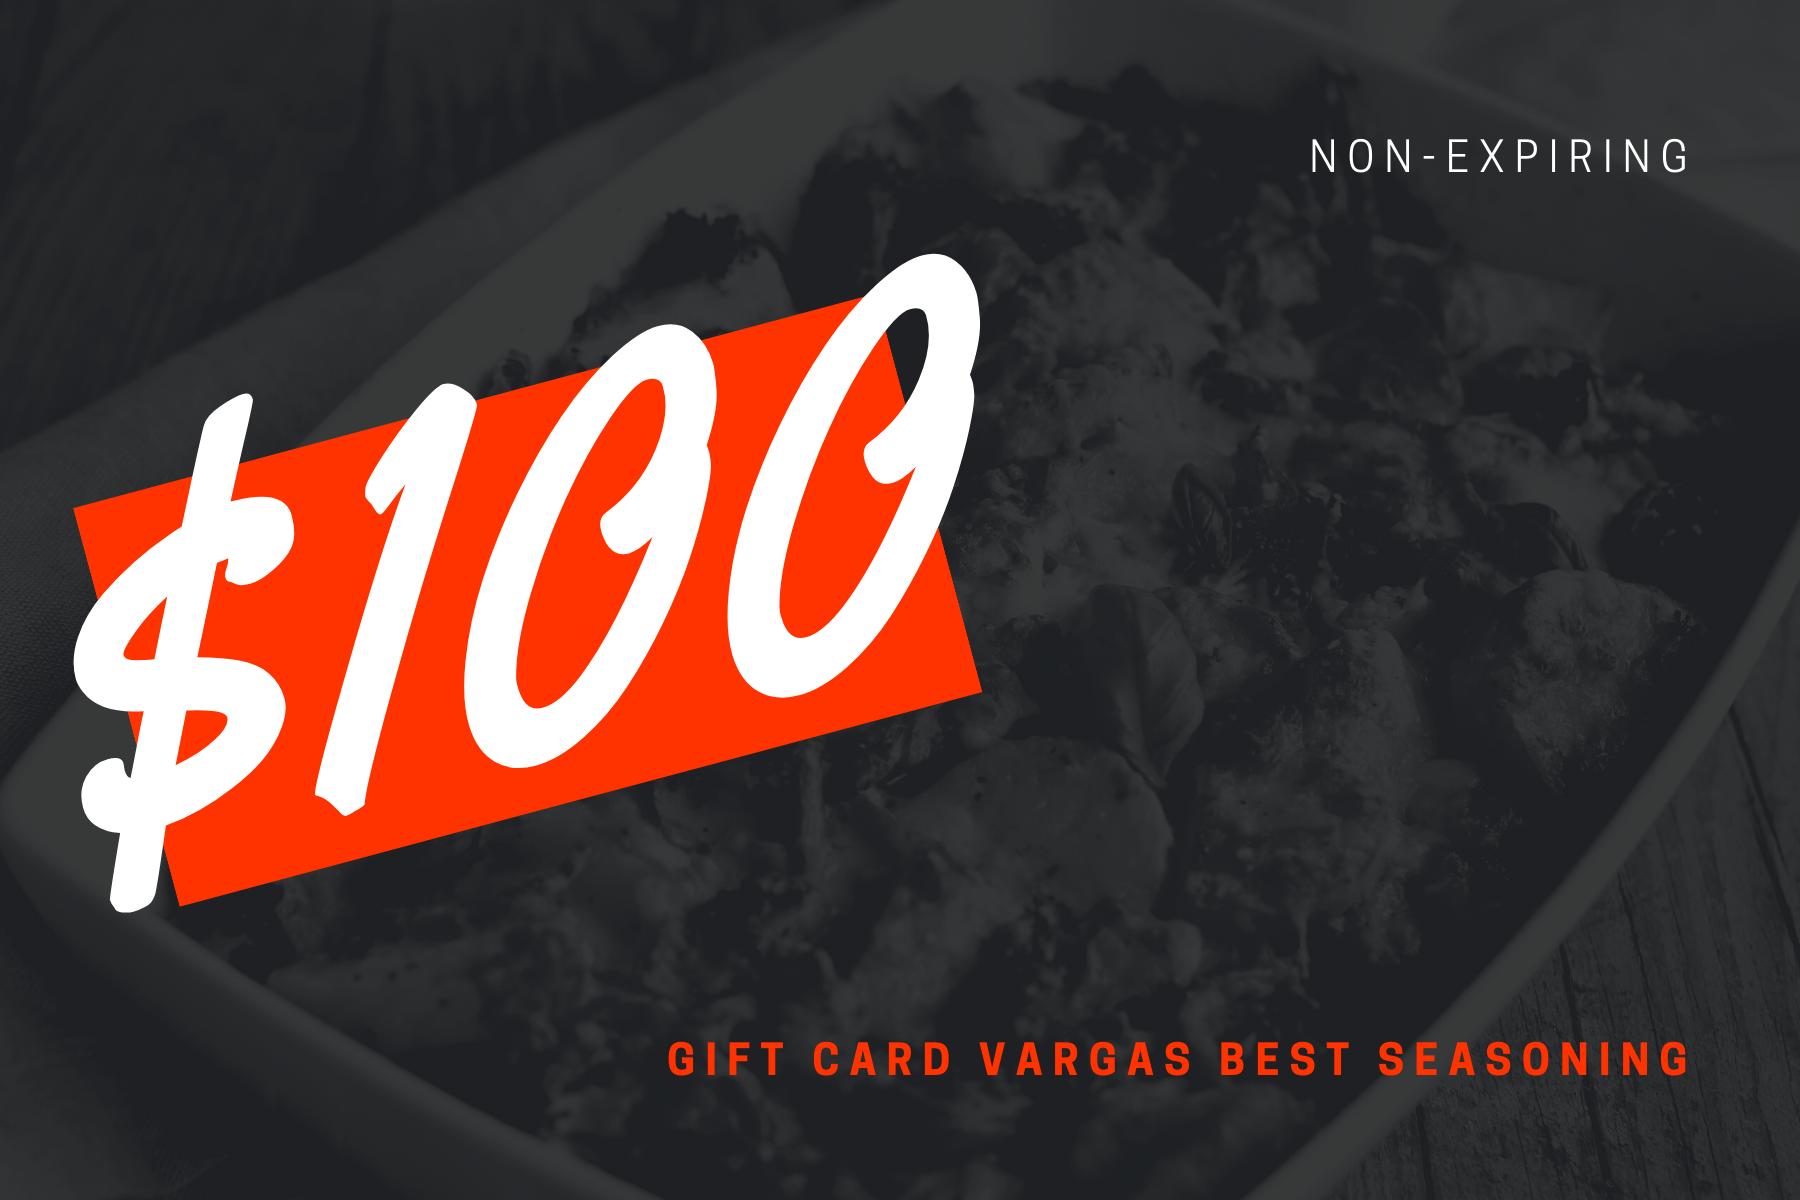 gift card for $100 best seasoning best healthy low sodium 100% All Natural ingredients